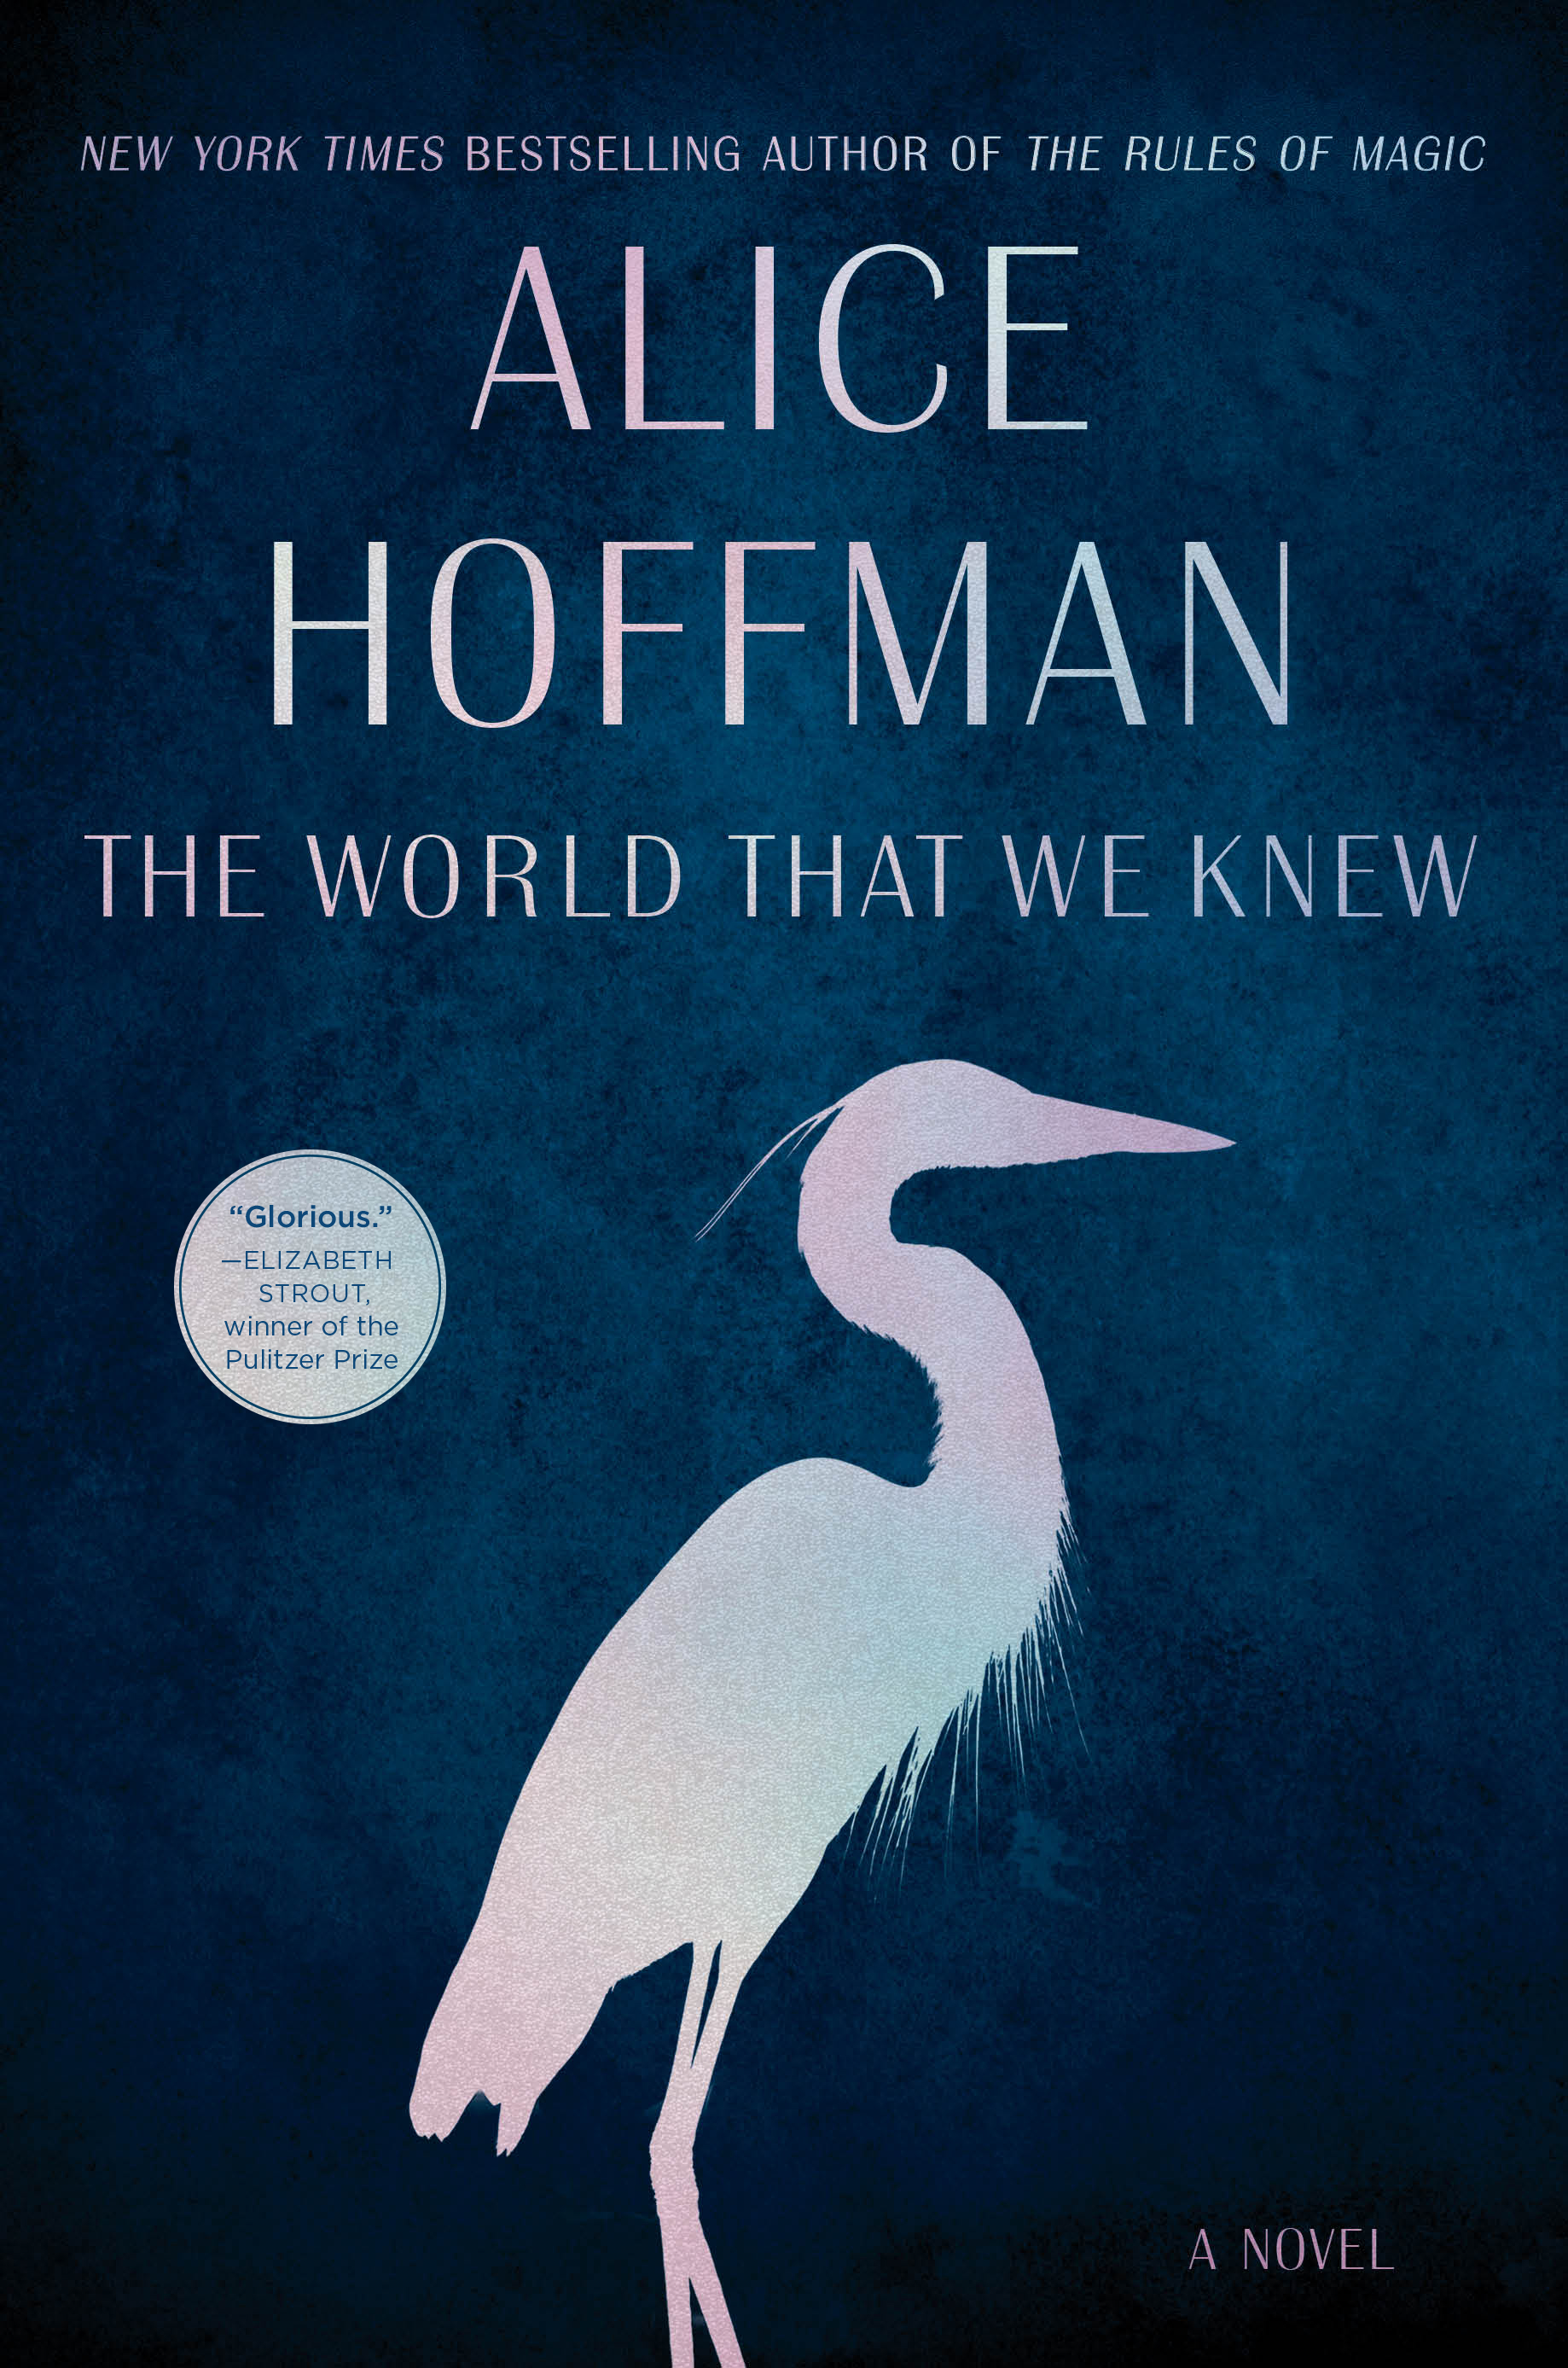 Book cover for The World That We Knew by Alice Hoffman.